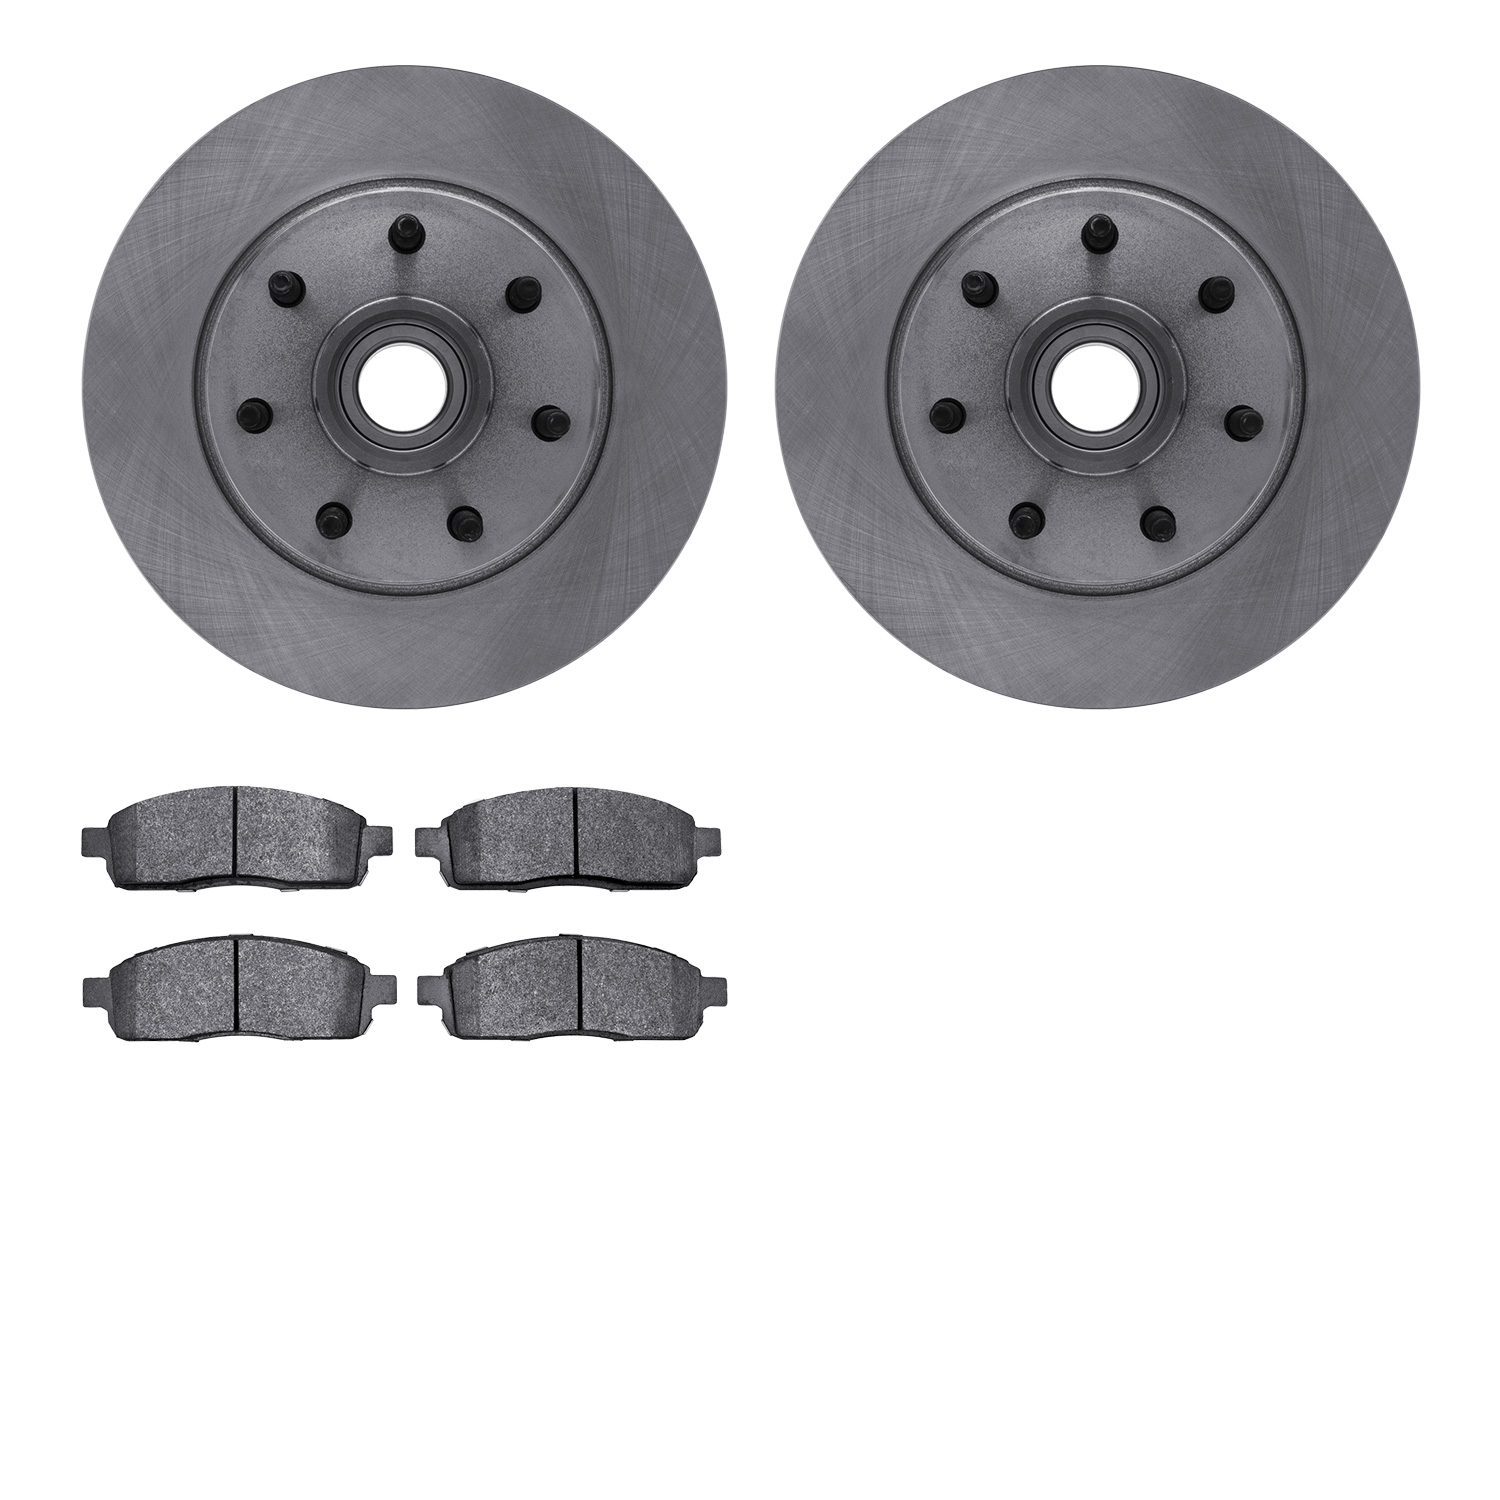 6402-54209 Brake Rotors with Ultimate-Duty Brake Pads, 2004-2008 Ford/Lincoln/Mercury/Mazda, Position: Front